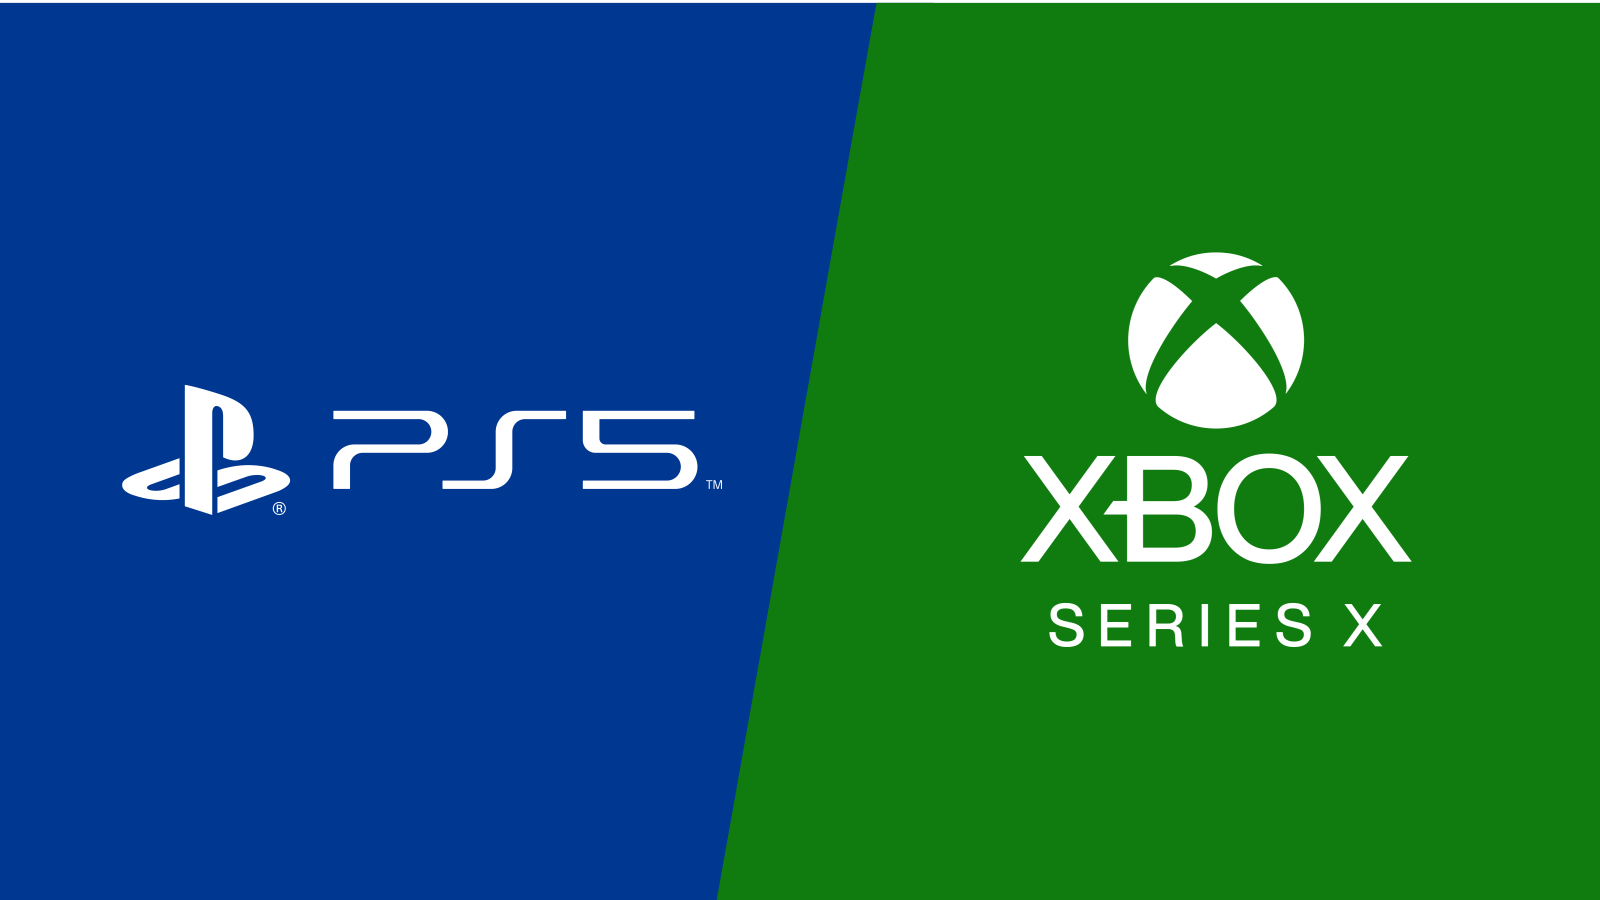 Xbox Series X vs PlayStation 5: find out which console has the best specs